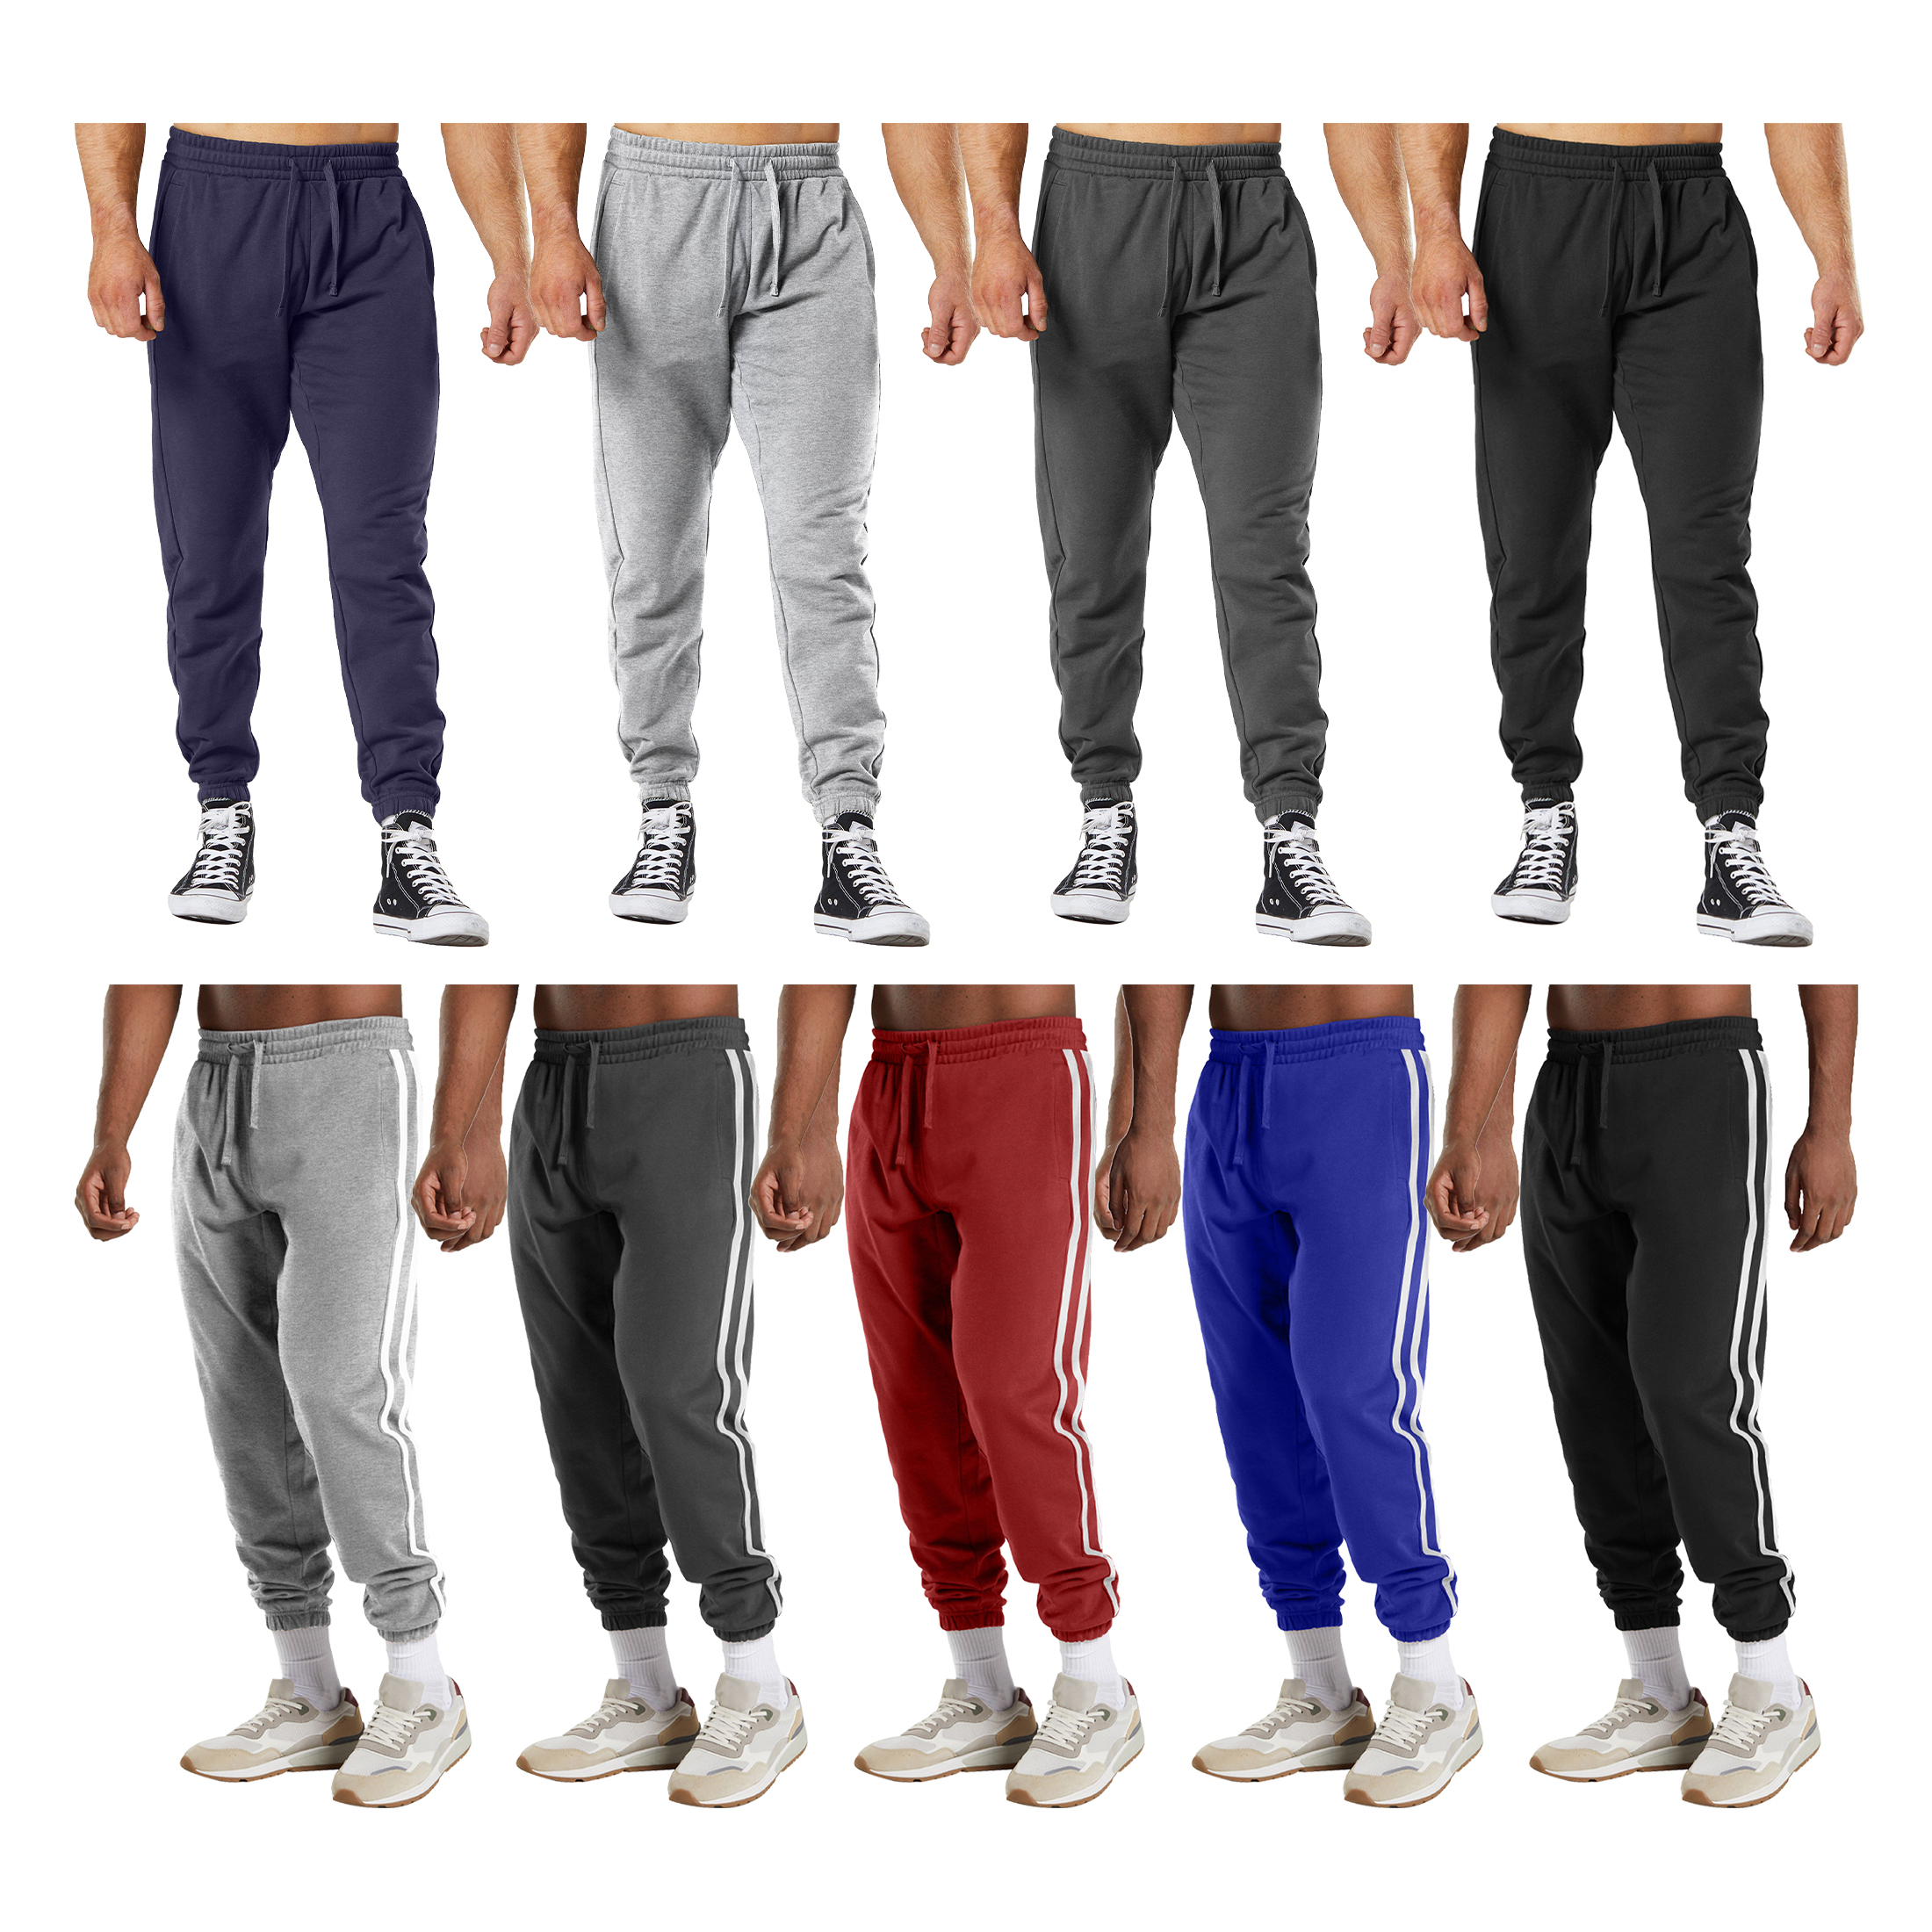 Multi-Pack: Men's Casual Fleece-Lined Elastic Bottom Jogger Pants With Pockets - 3-PACK, XXL